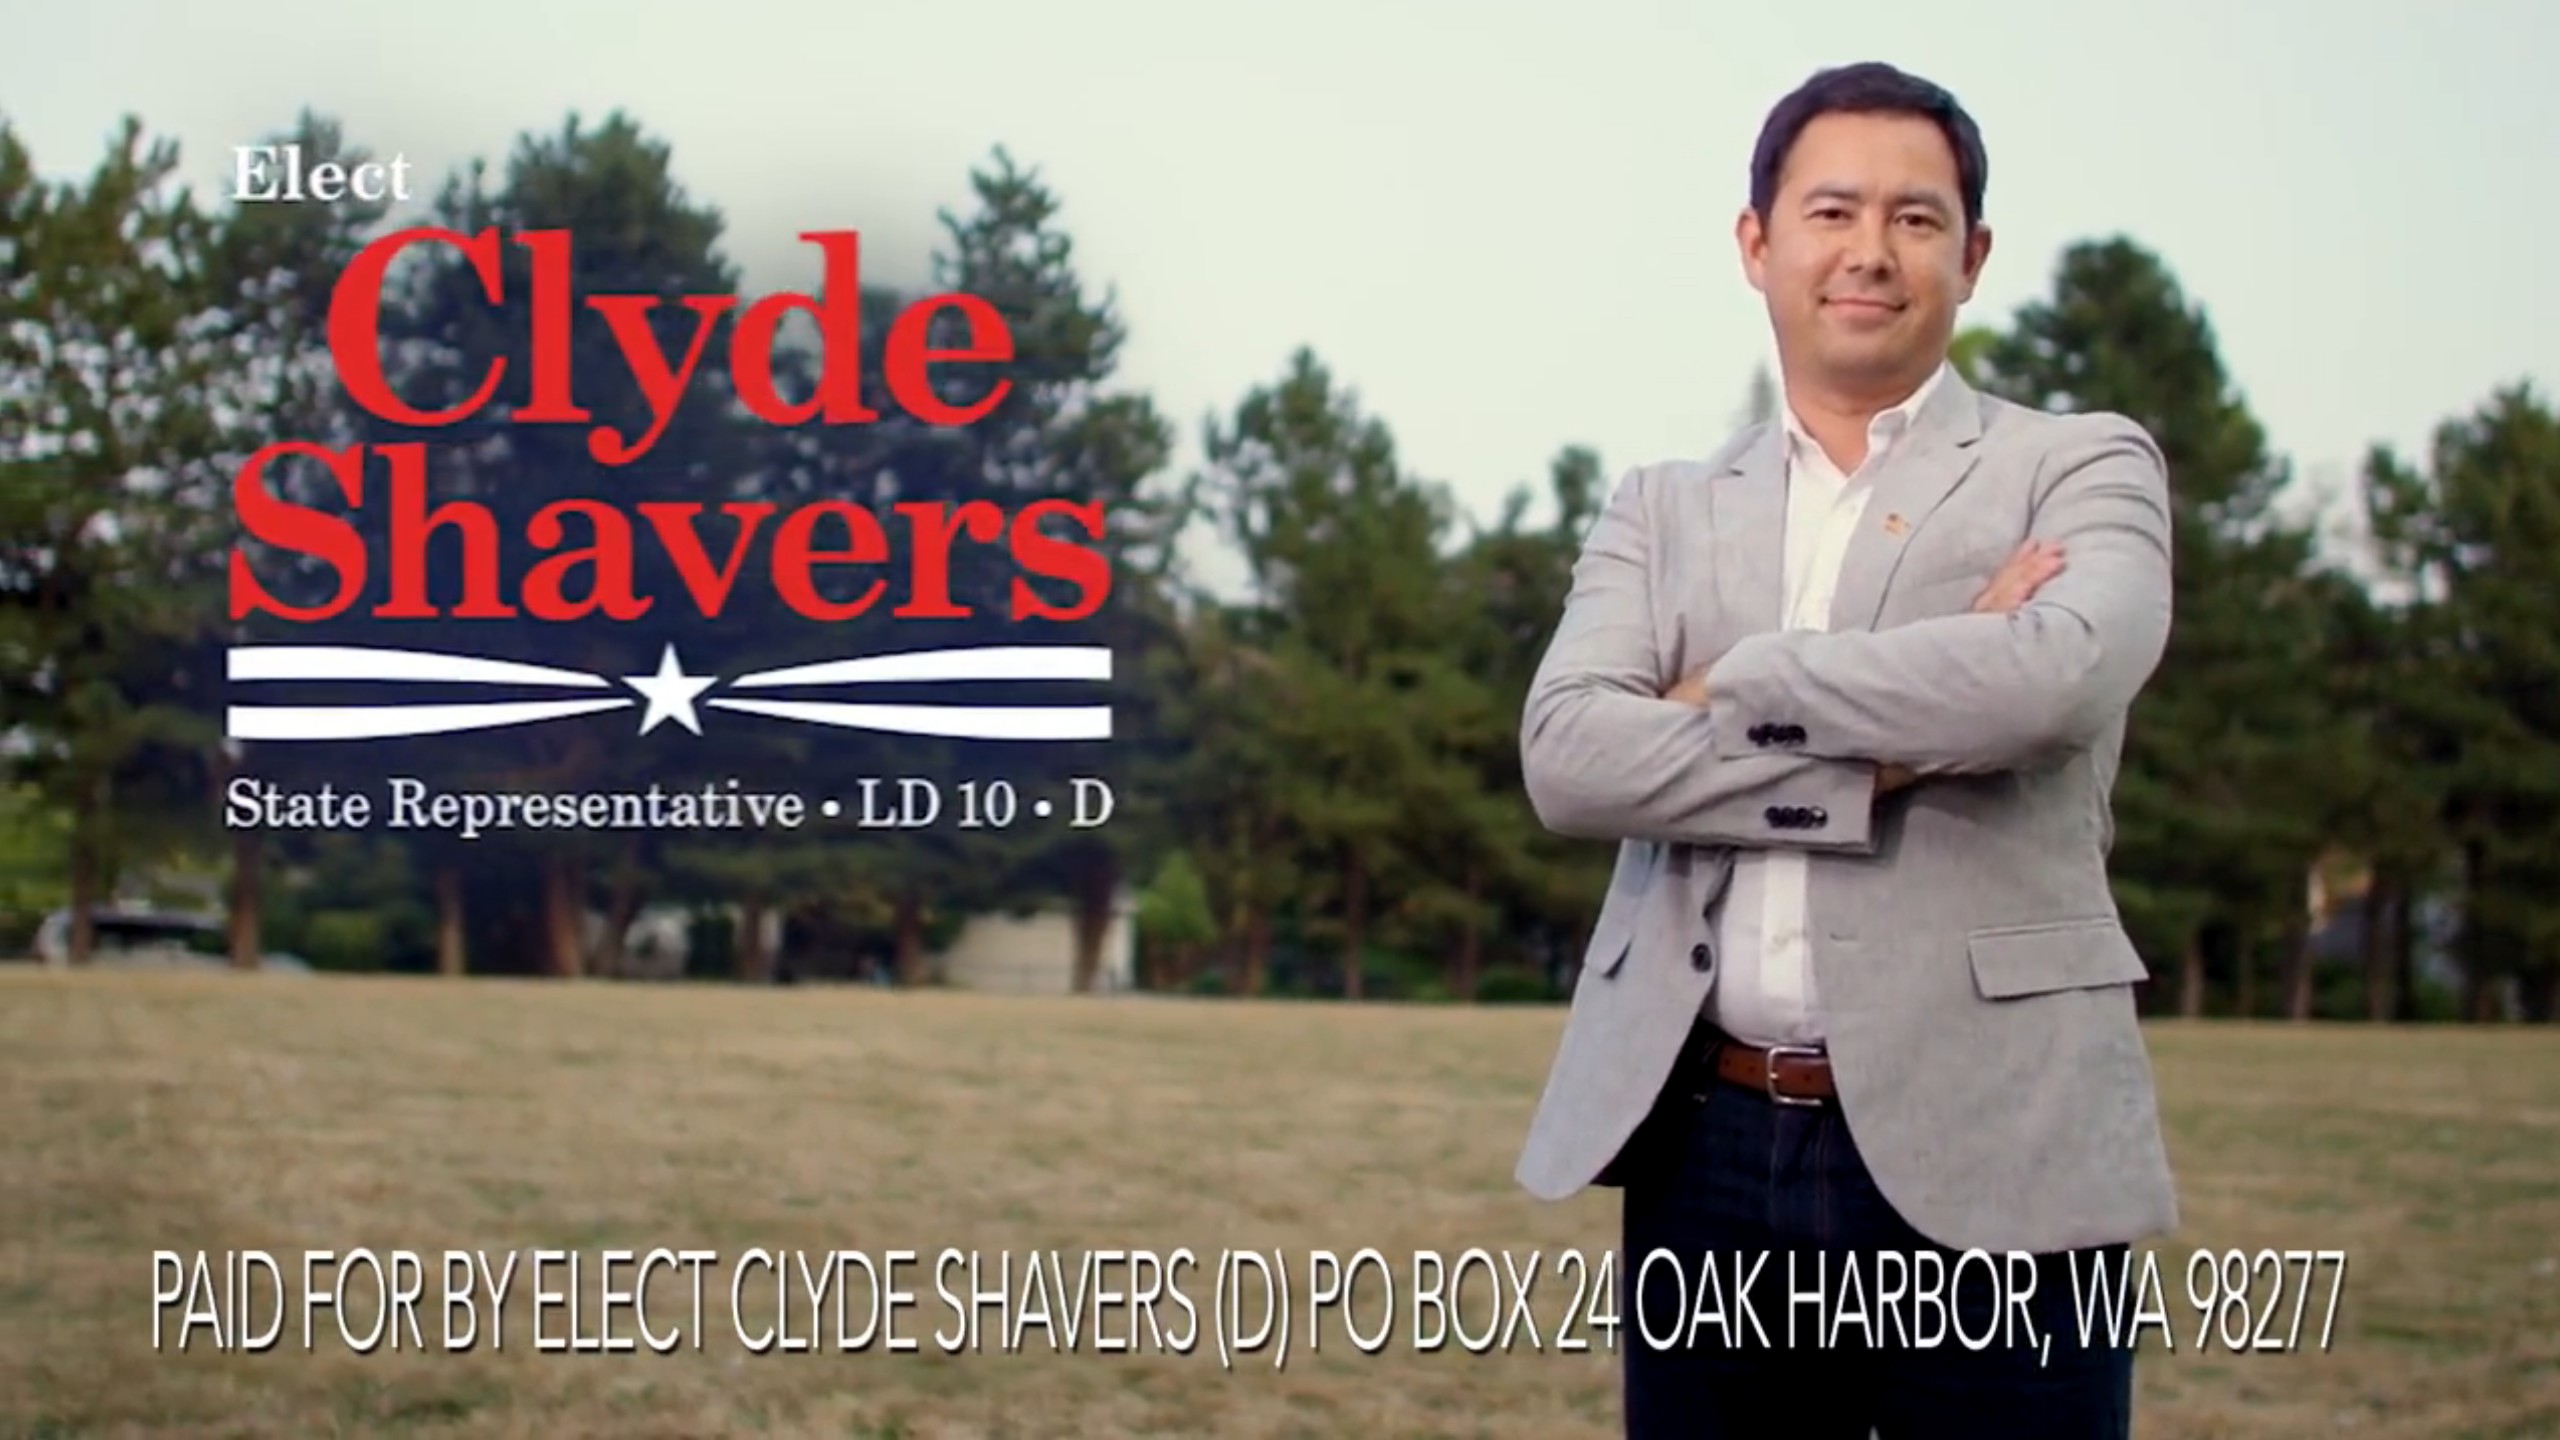 Clyde Shavers for State Representative (ad still)